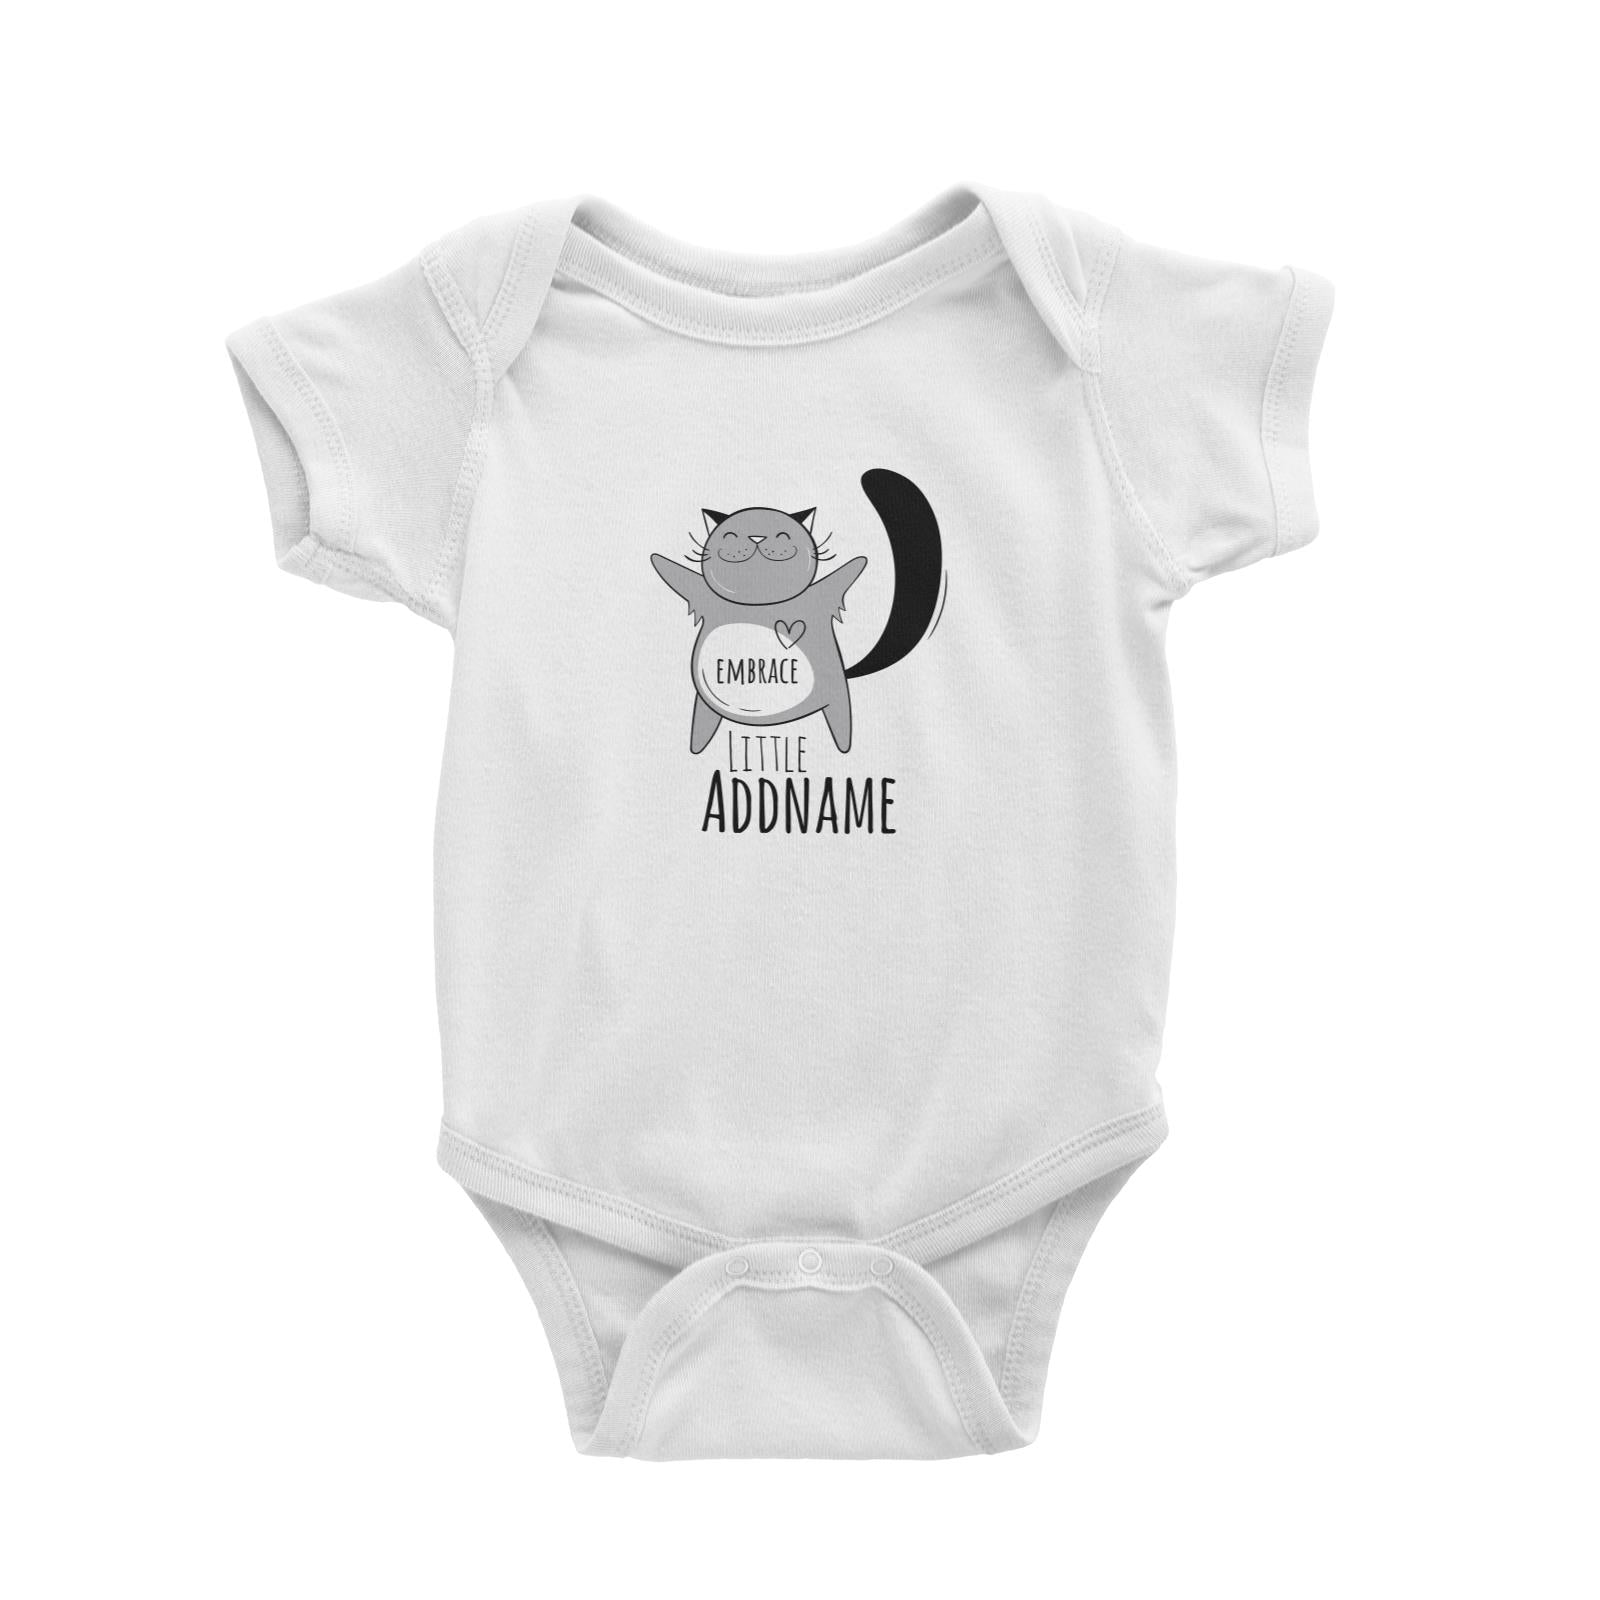 Drawn Adorable Animals Embrace Addname Baby Romper